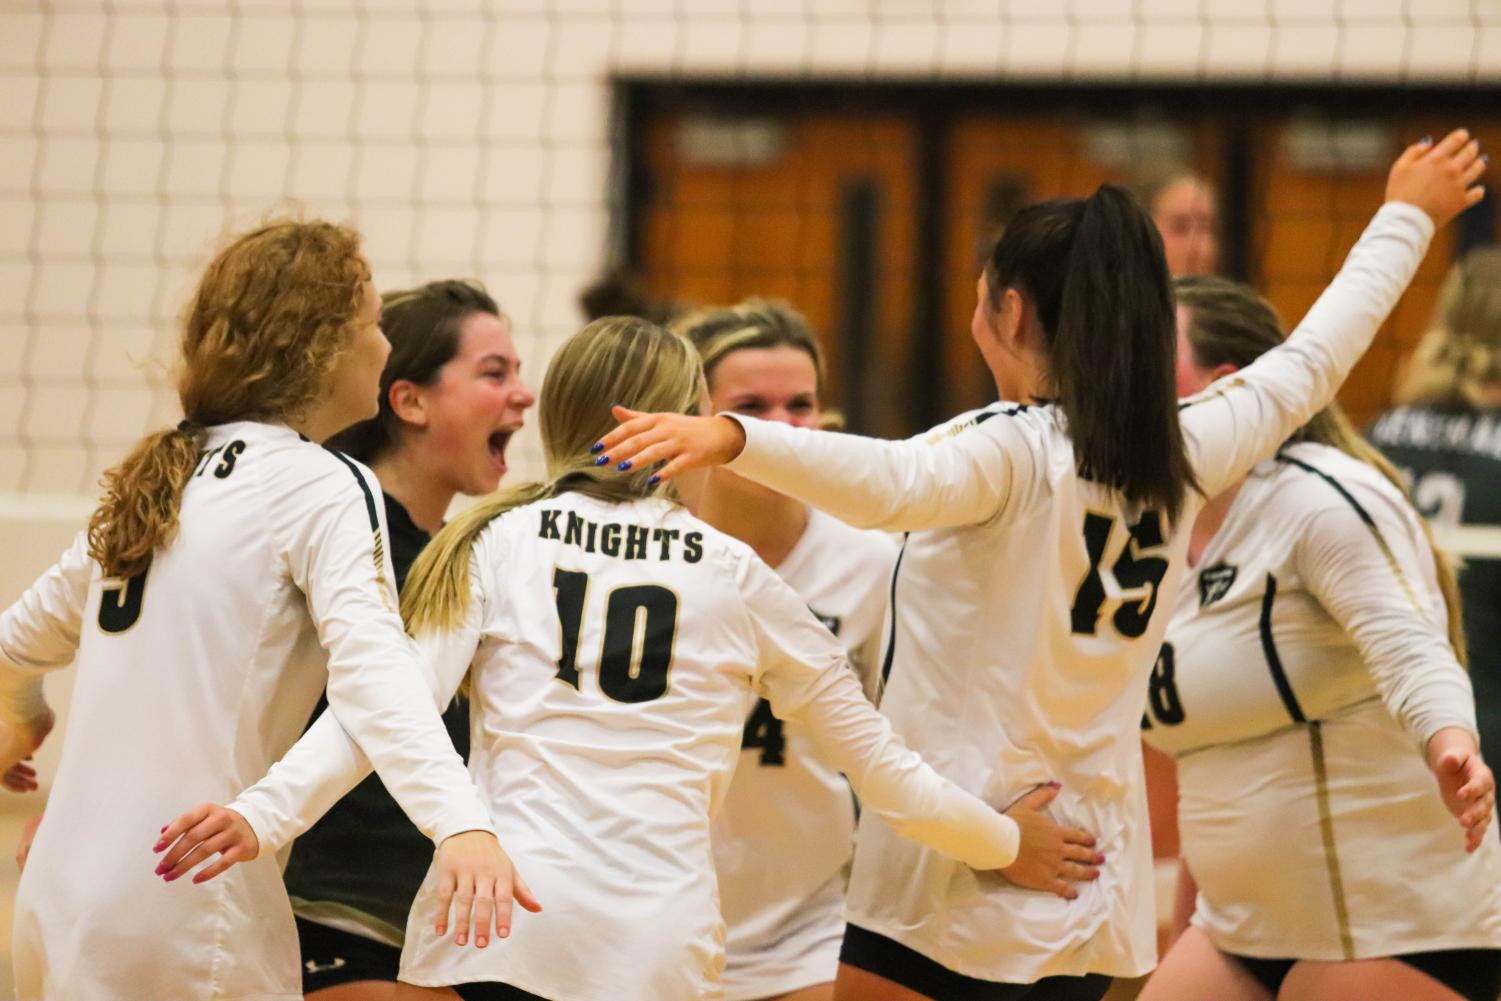 The team heads to hug in celebration during their volleyball game